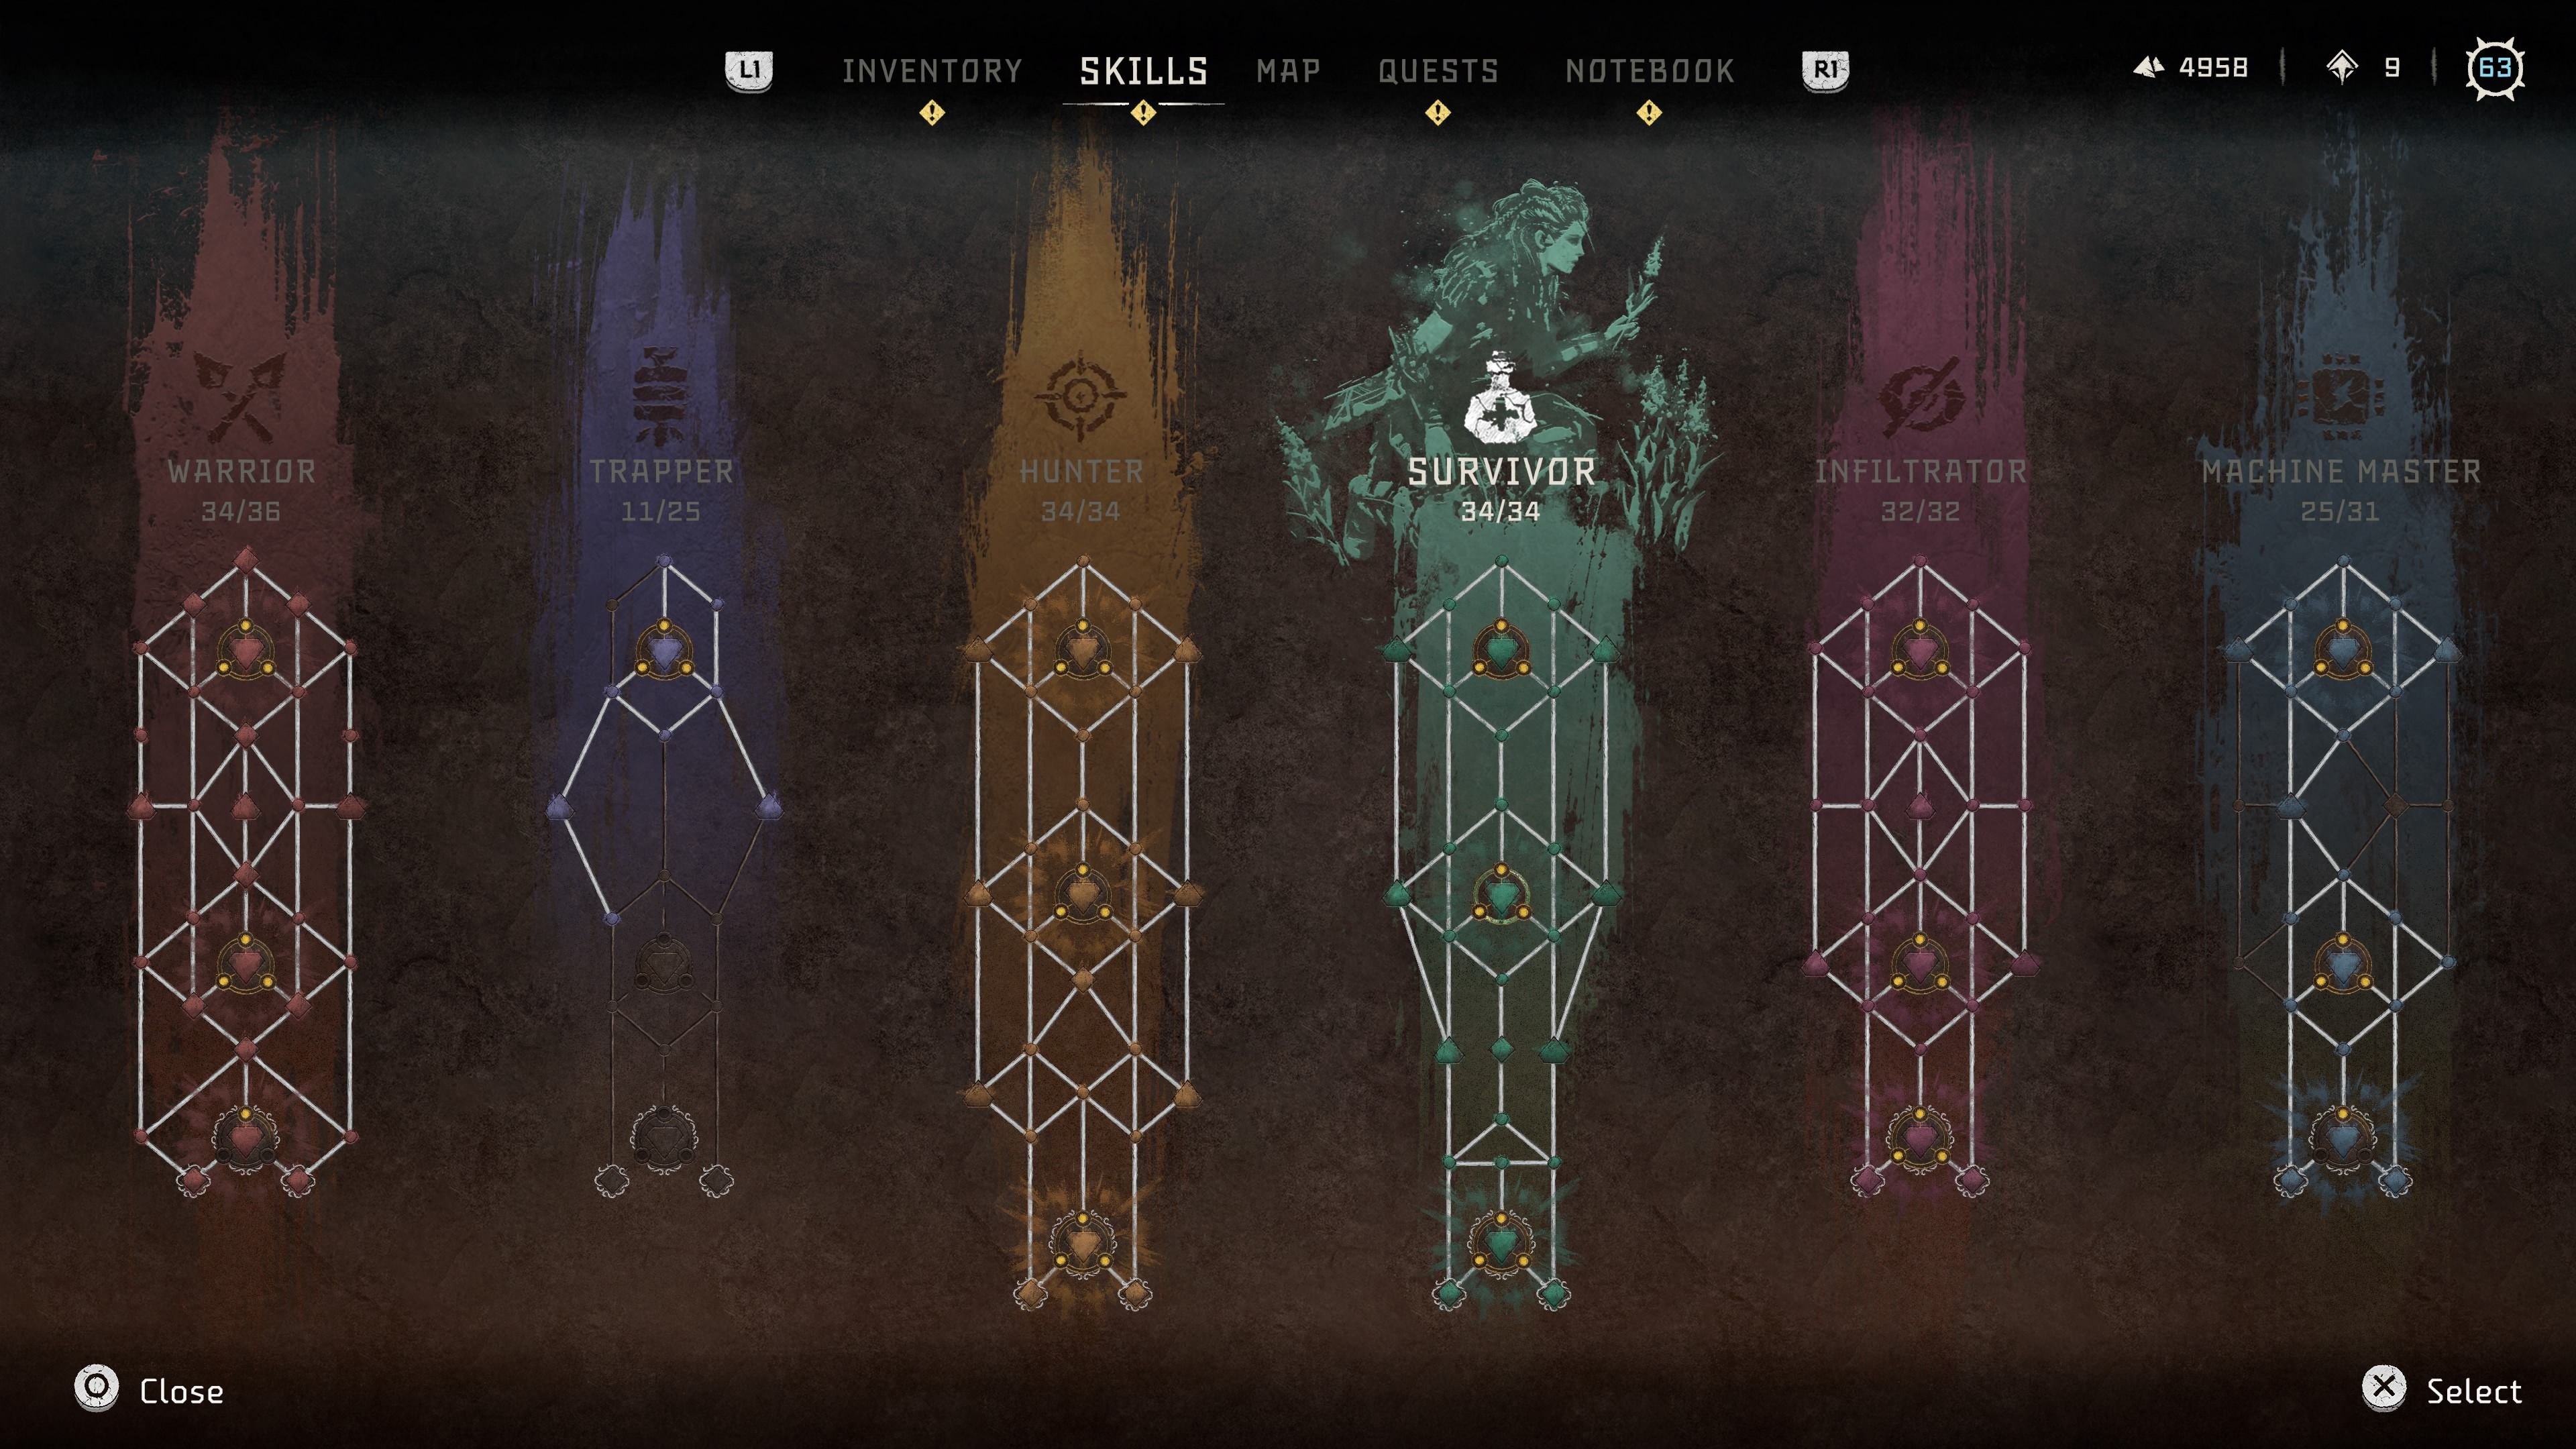 Skill Trees With Skills Unlocked In Horizon Forbidden West At Player Level 63